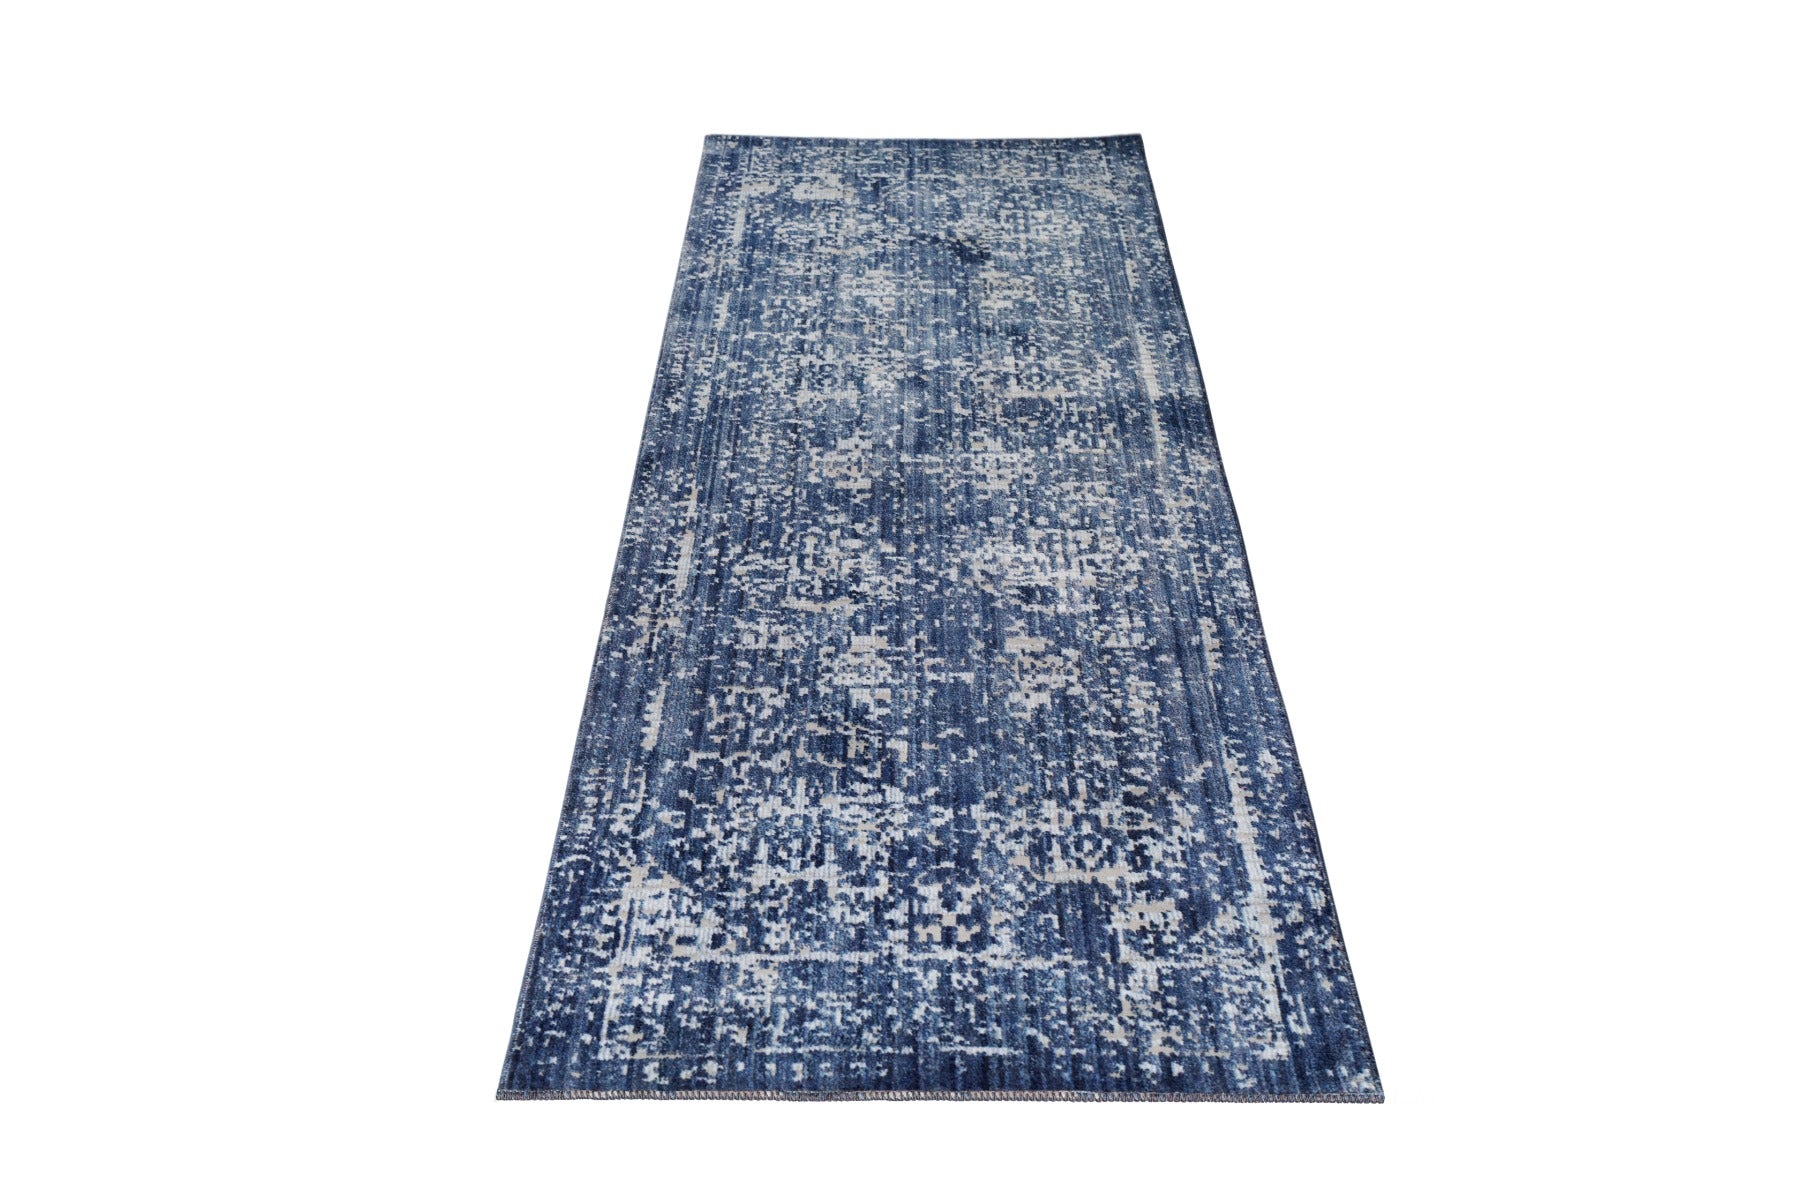 Persian style hallway runner in navy and grey